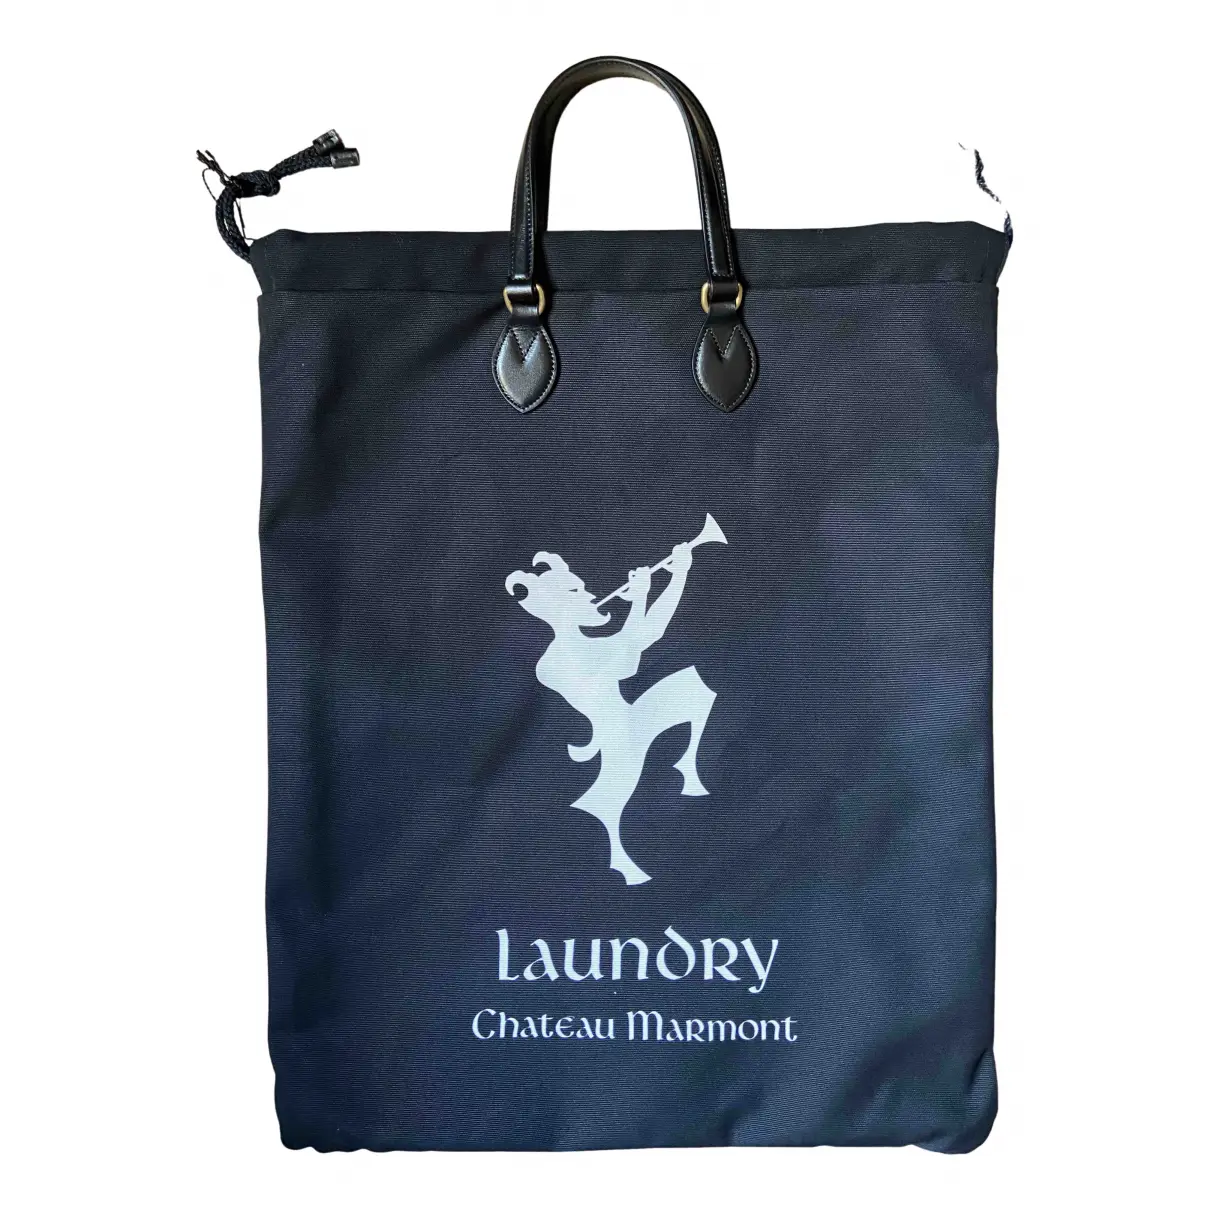 Buy Gucci Laundry bag tote online